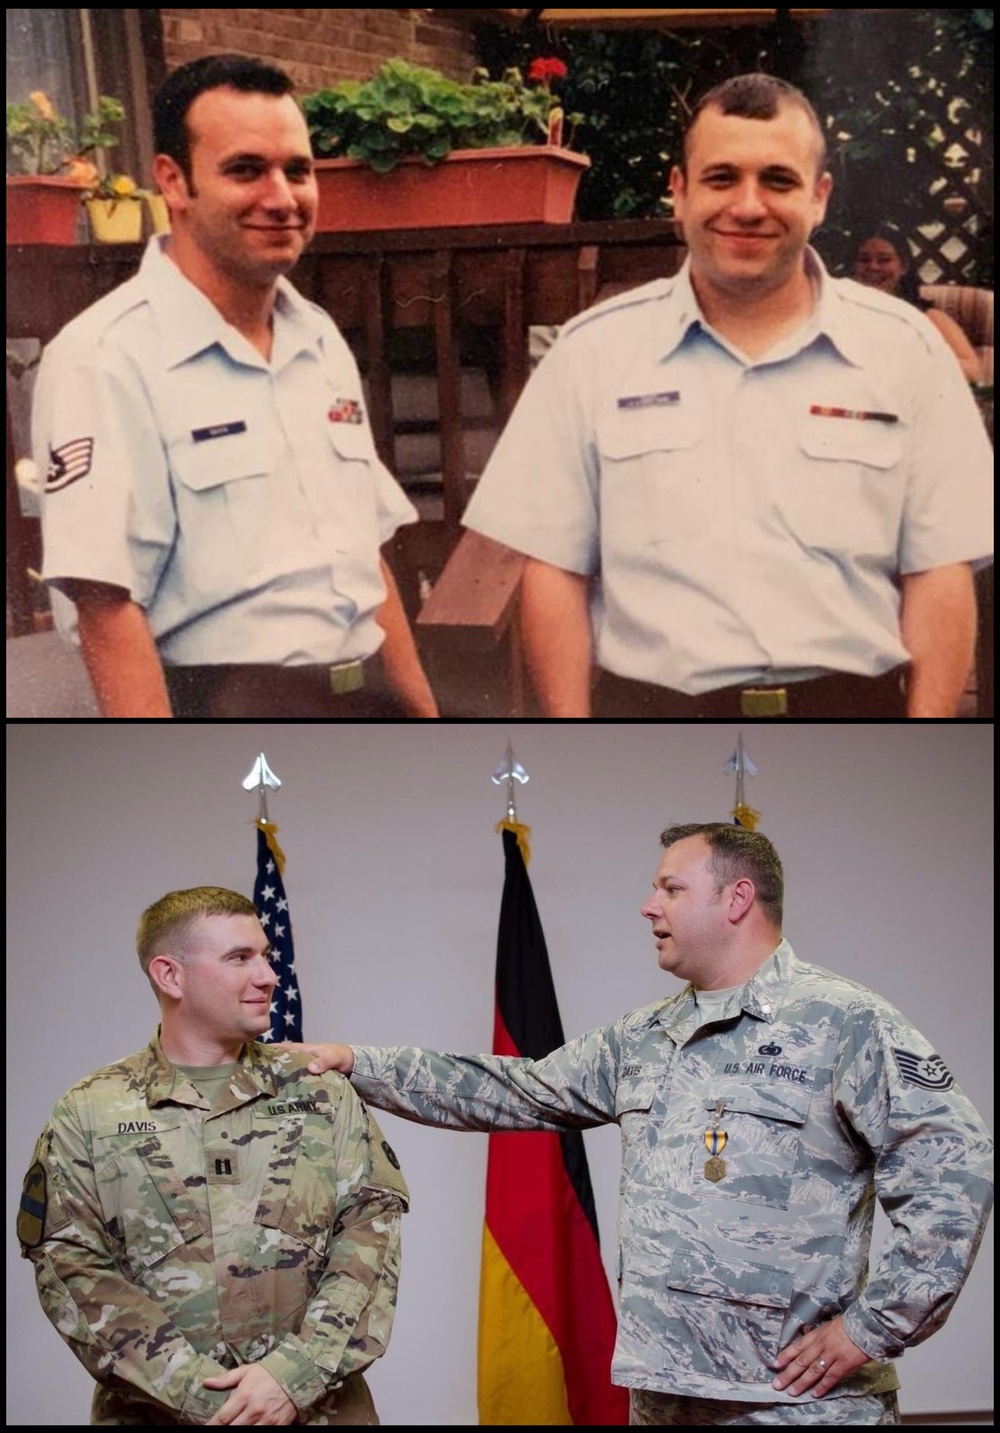 LRC Ansbach transportation specialist has two brothers who also serve in military logistics